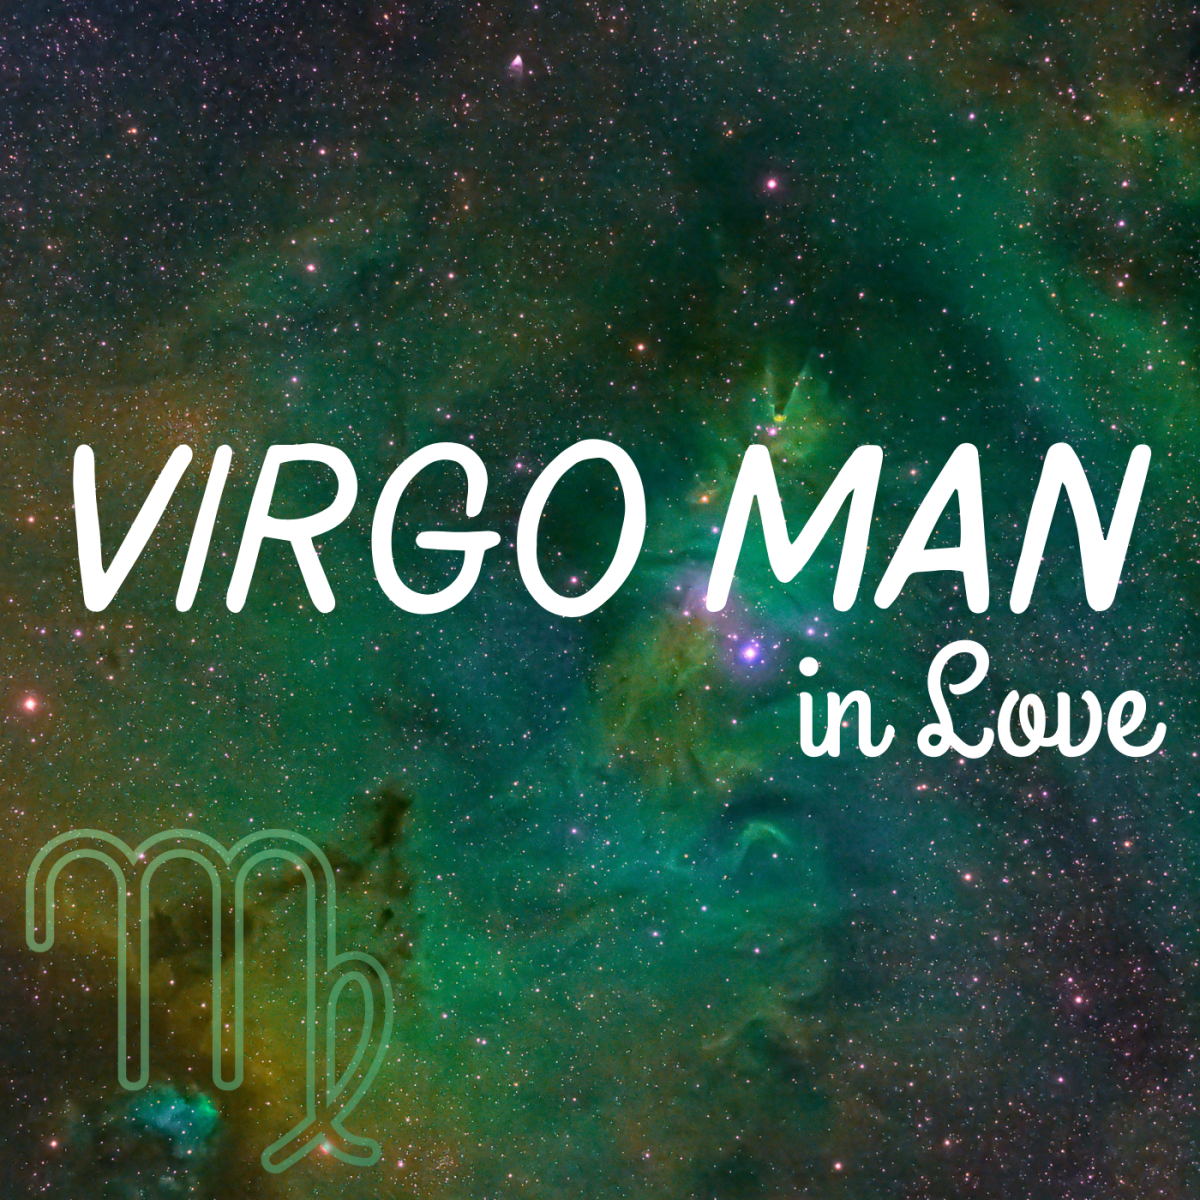 Take a humorous look at the dating life of a male Virgo!